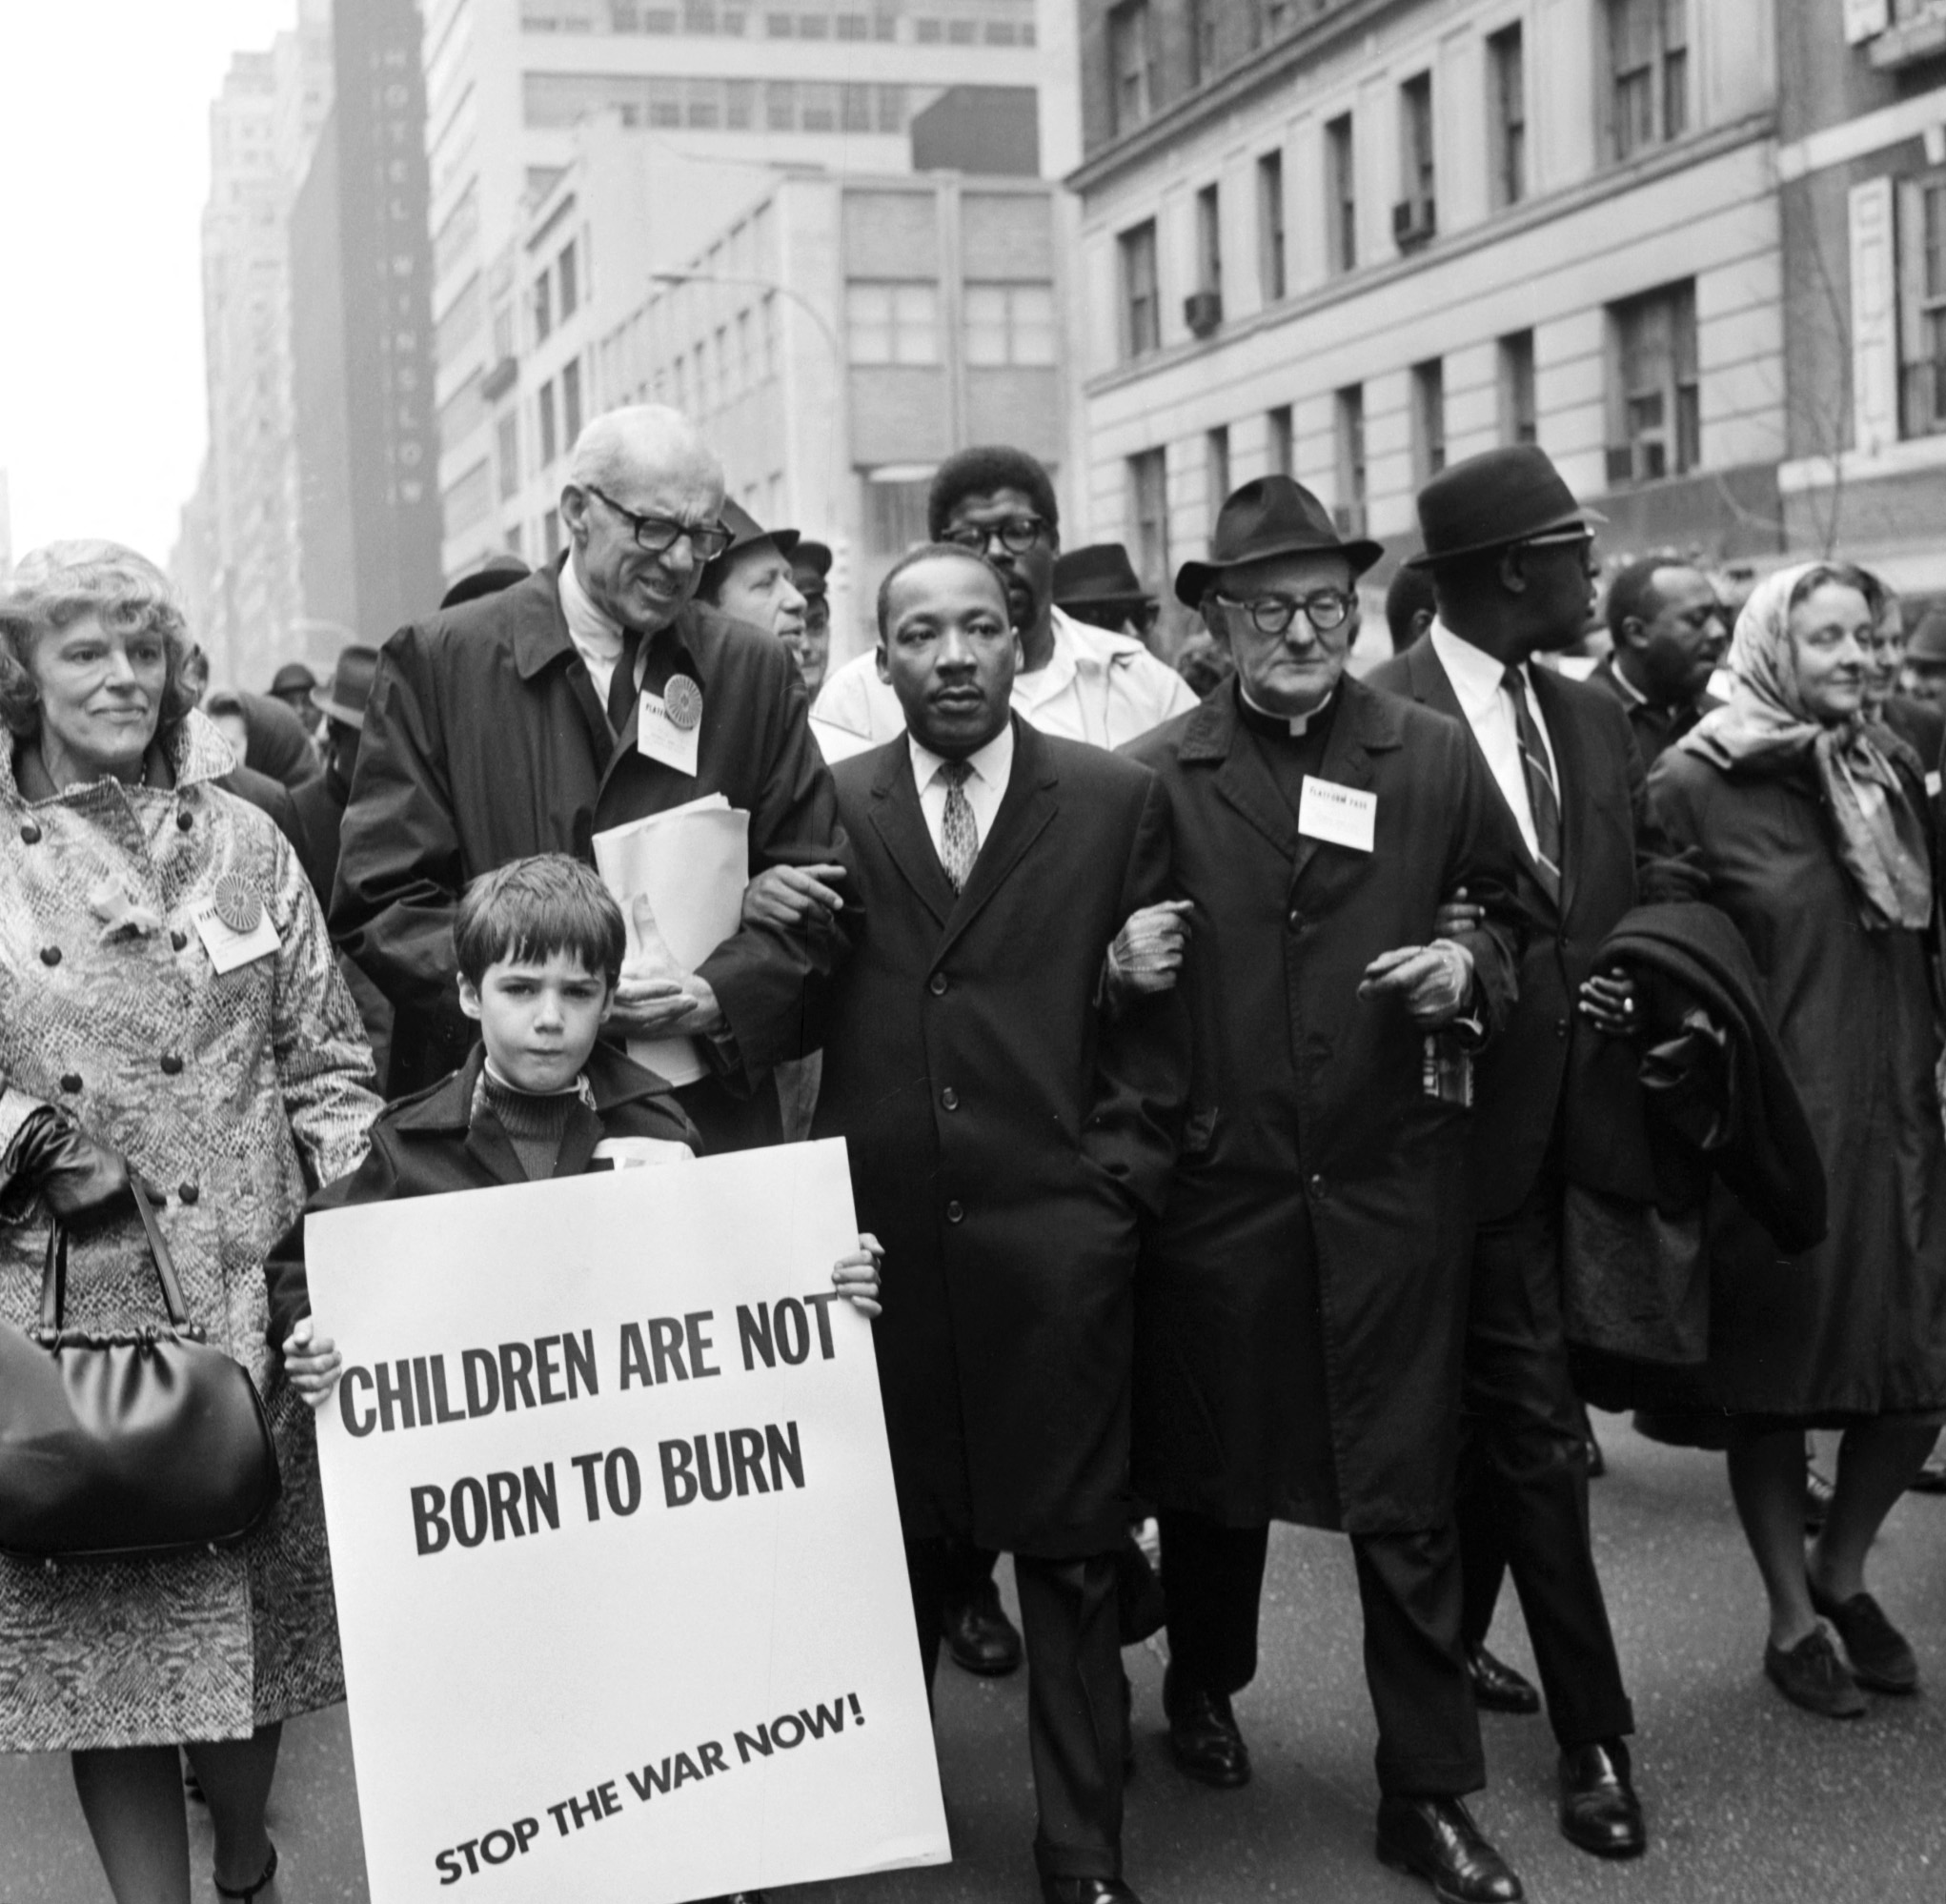 Civil rights leader Rev. Martin Luther King, Jr., (C) is accompanied by famed pediatrician Dr. Benjamin Spock (2nd-L), Father Frederick Reed (3rd-R) and union leader Cleveland Robinson (2nd-R) 16 March, 1967, during an anti-Vietnam War demonstration in New York. The US is celebrating in 2004 what would have been King's 75th birthday. King was assassinated on 04 April, 1968, in Memphis, Tennessee. (Photo: AFP via Getty Images)